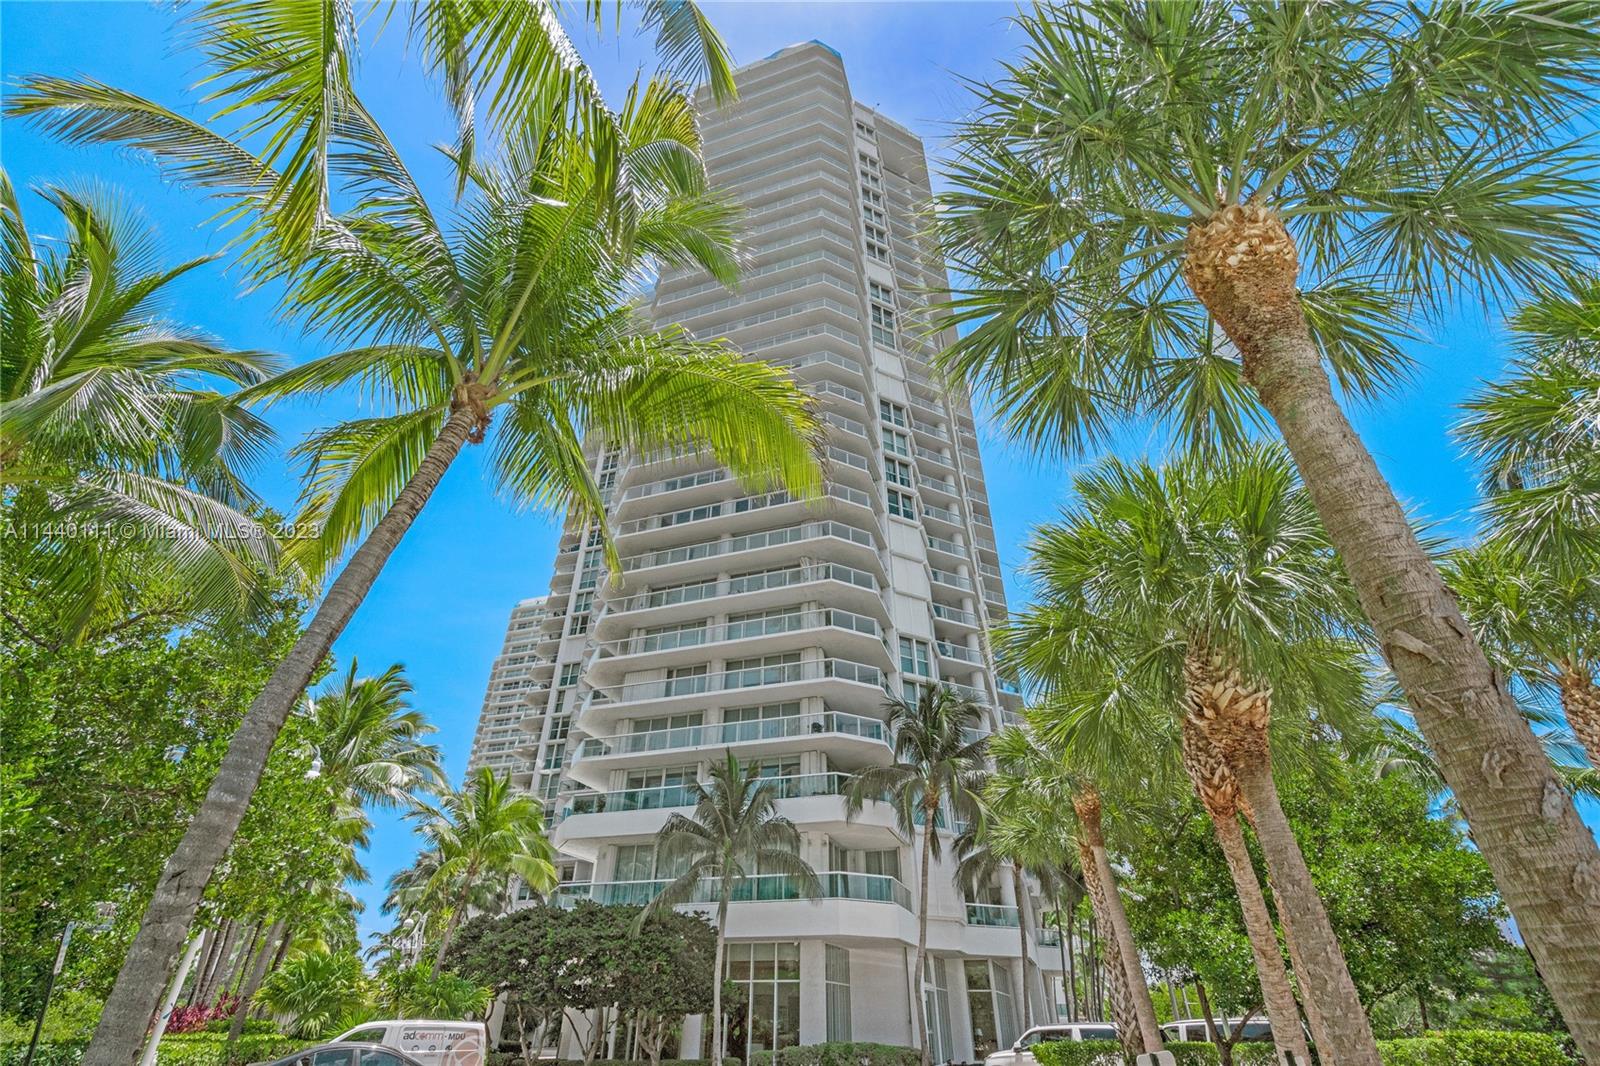 Beautiful and perfectly maintained 2 bedroom in the heart of sunny isles. This special 2 bedroom unit features custom and hand painted wall accents, wood-look porcelain floors, dedicated laundry room with plenty of storage, beautifully renovated bathrooms and kitchen, multiple living and dining areas, and oversized balcony. Wake up to sunrise on the ocean with eastern views overlooking water and the sunny isles skyline,comes with exclusive membership to Oceania club!!! See photos of sauna, steam room, ocean front gym, private beach with butler food service to your chairs! private basketball court and tennis courts, with casual and formal restaurant !!